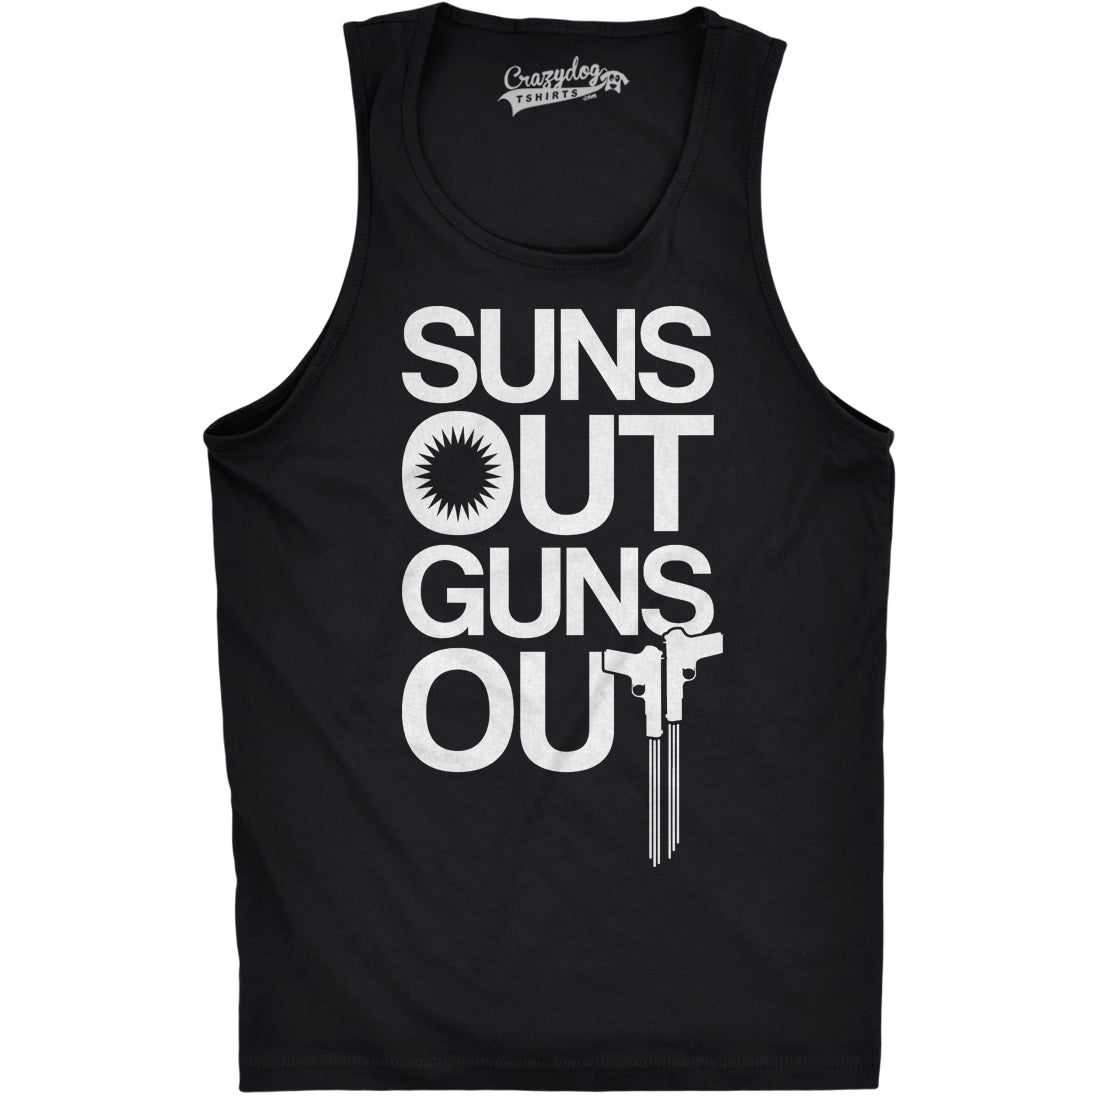 Funny Black Suns Out Guns Out Mens Tank Top Nerdy Fitness Tee